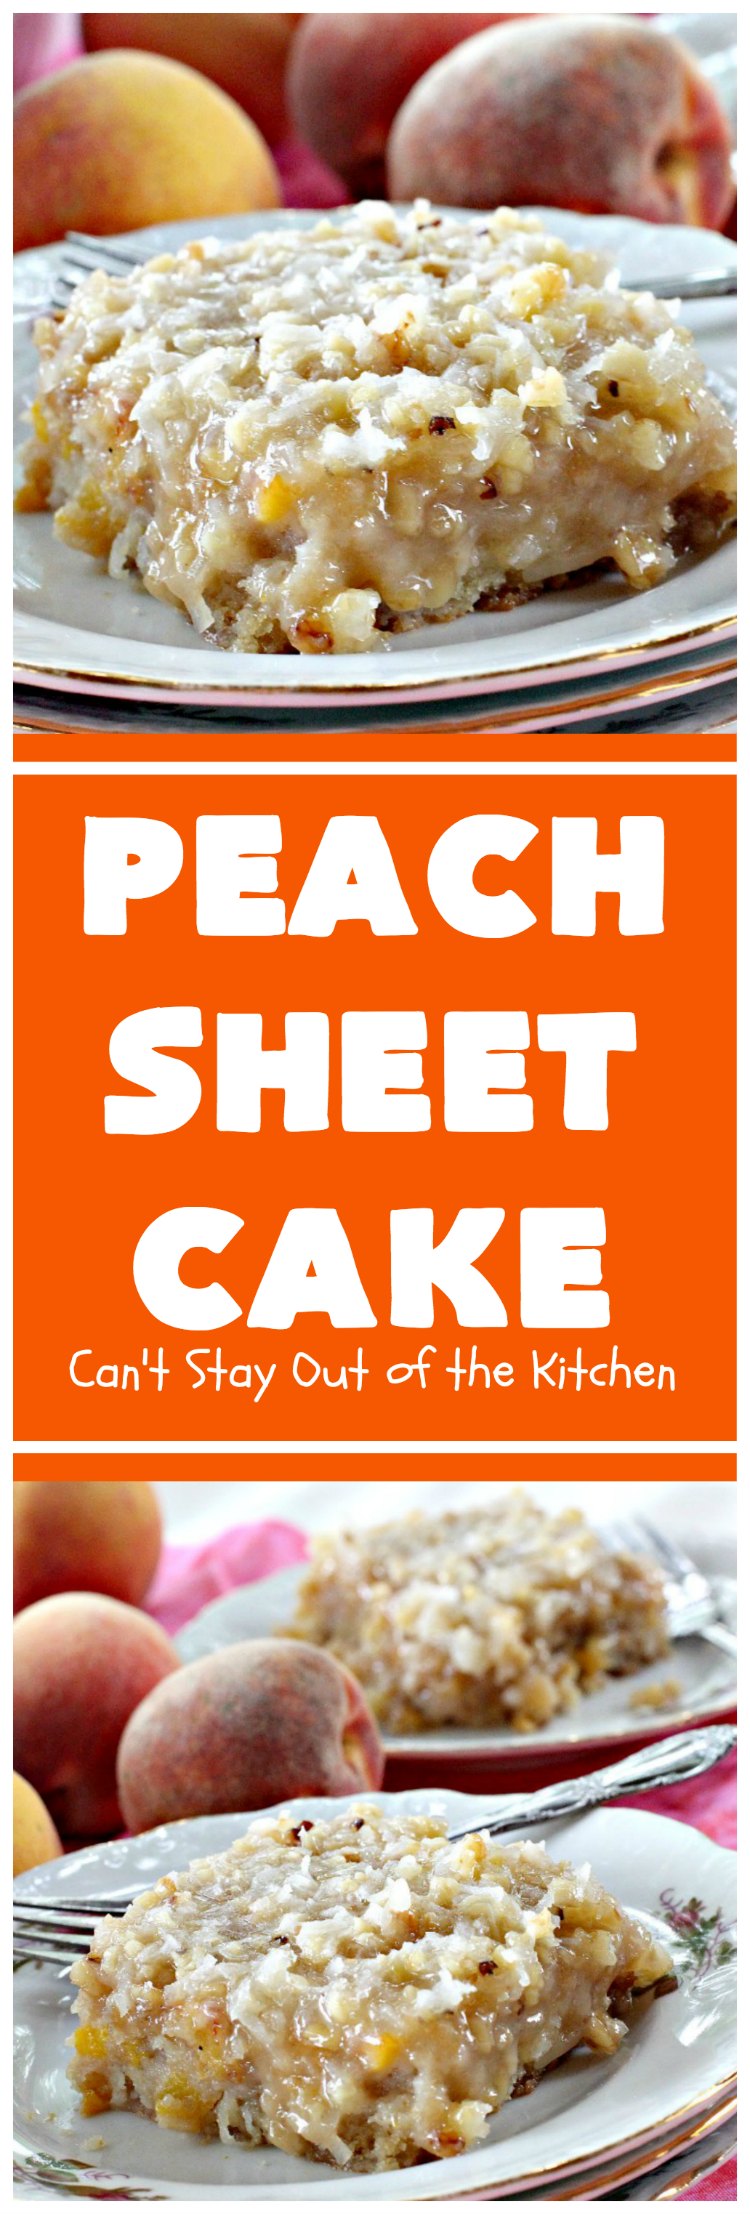 Peach Sheet Cake | Can't Stay Out of the Kitchen